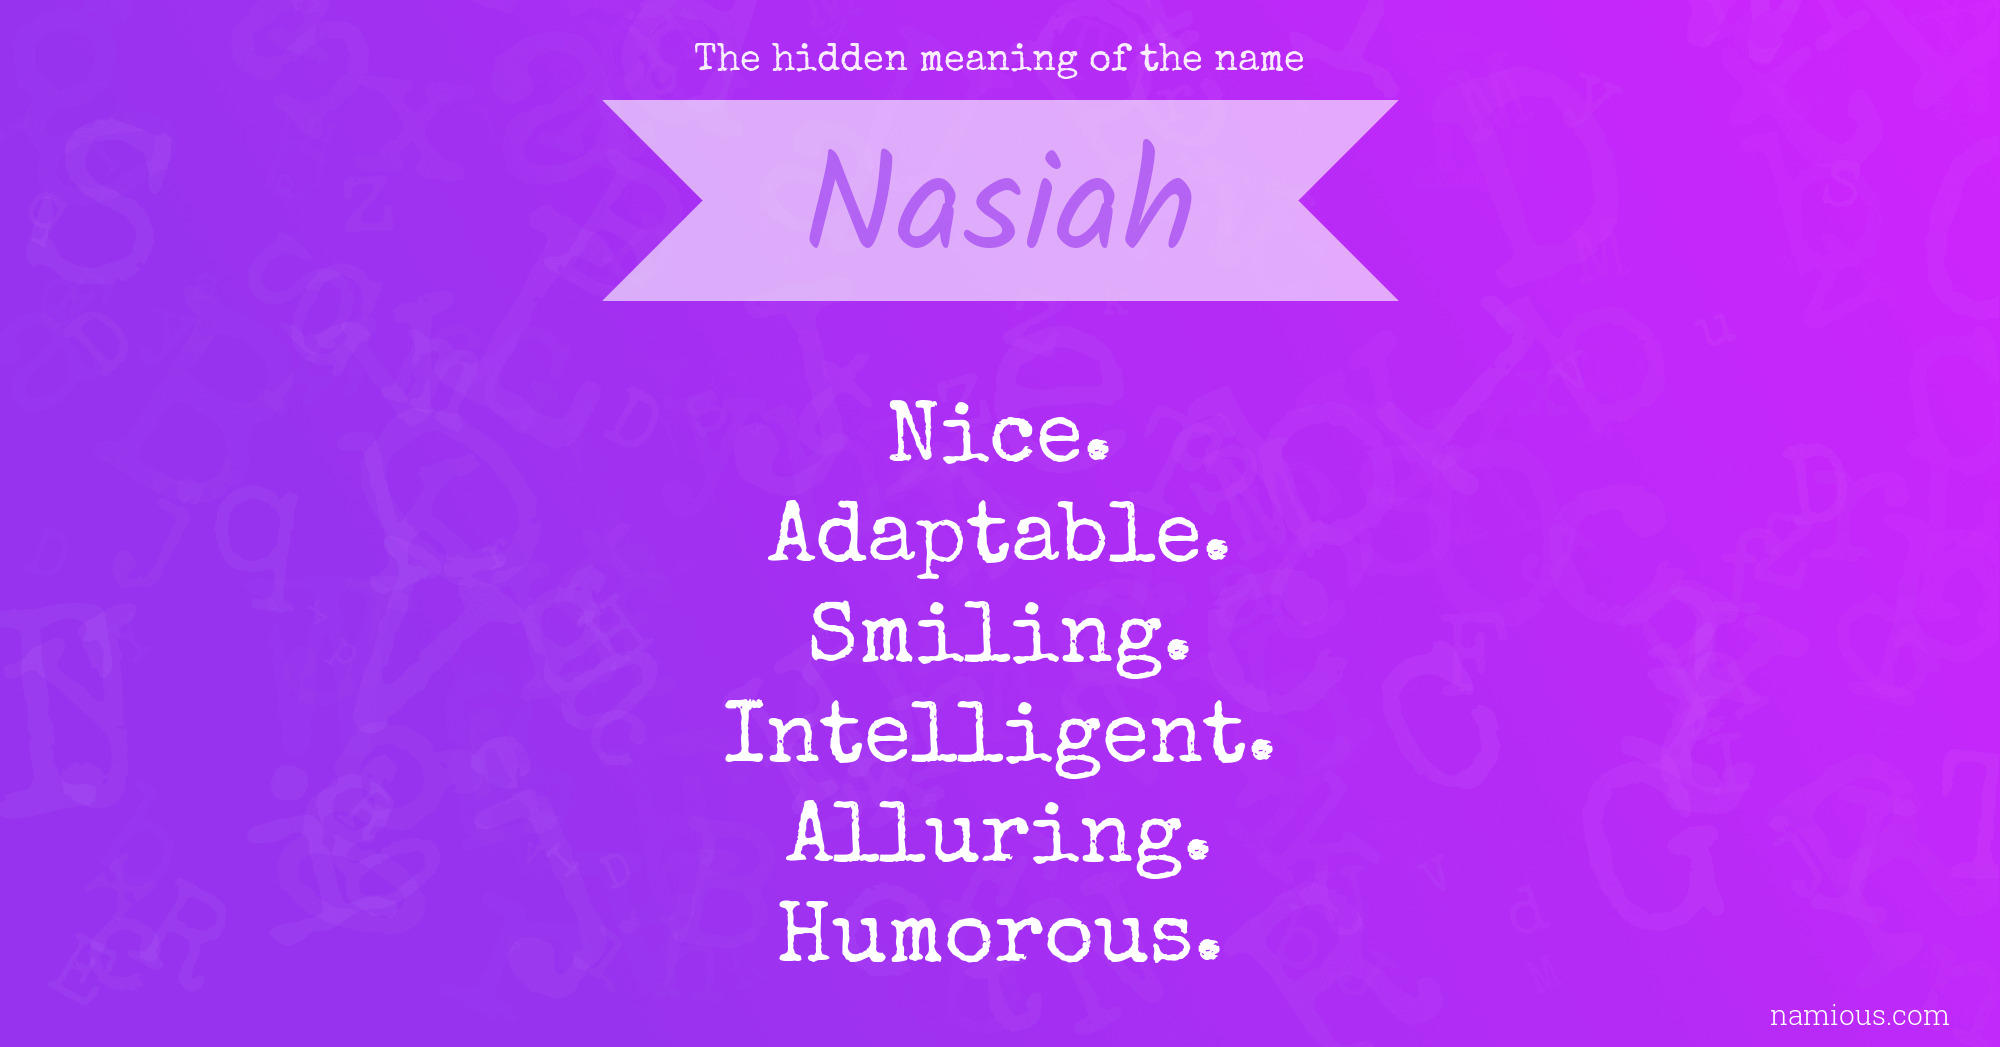 The hidden meaning of the name Nasiah